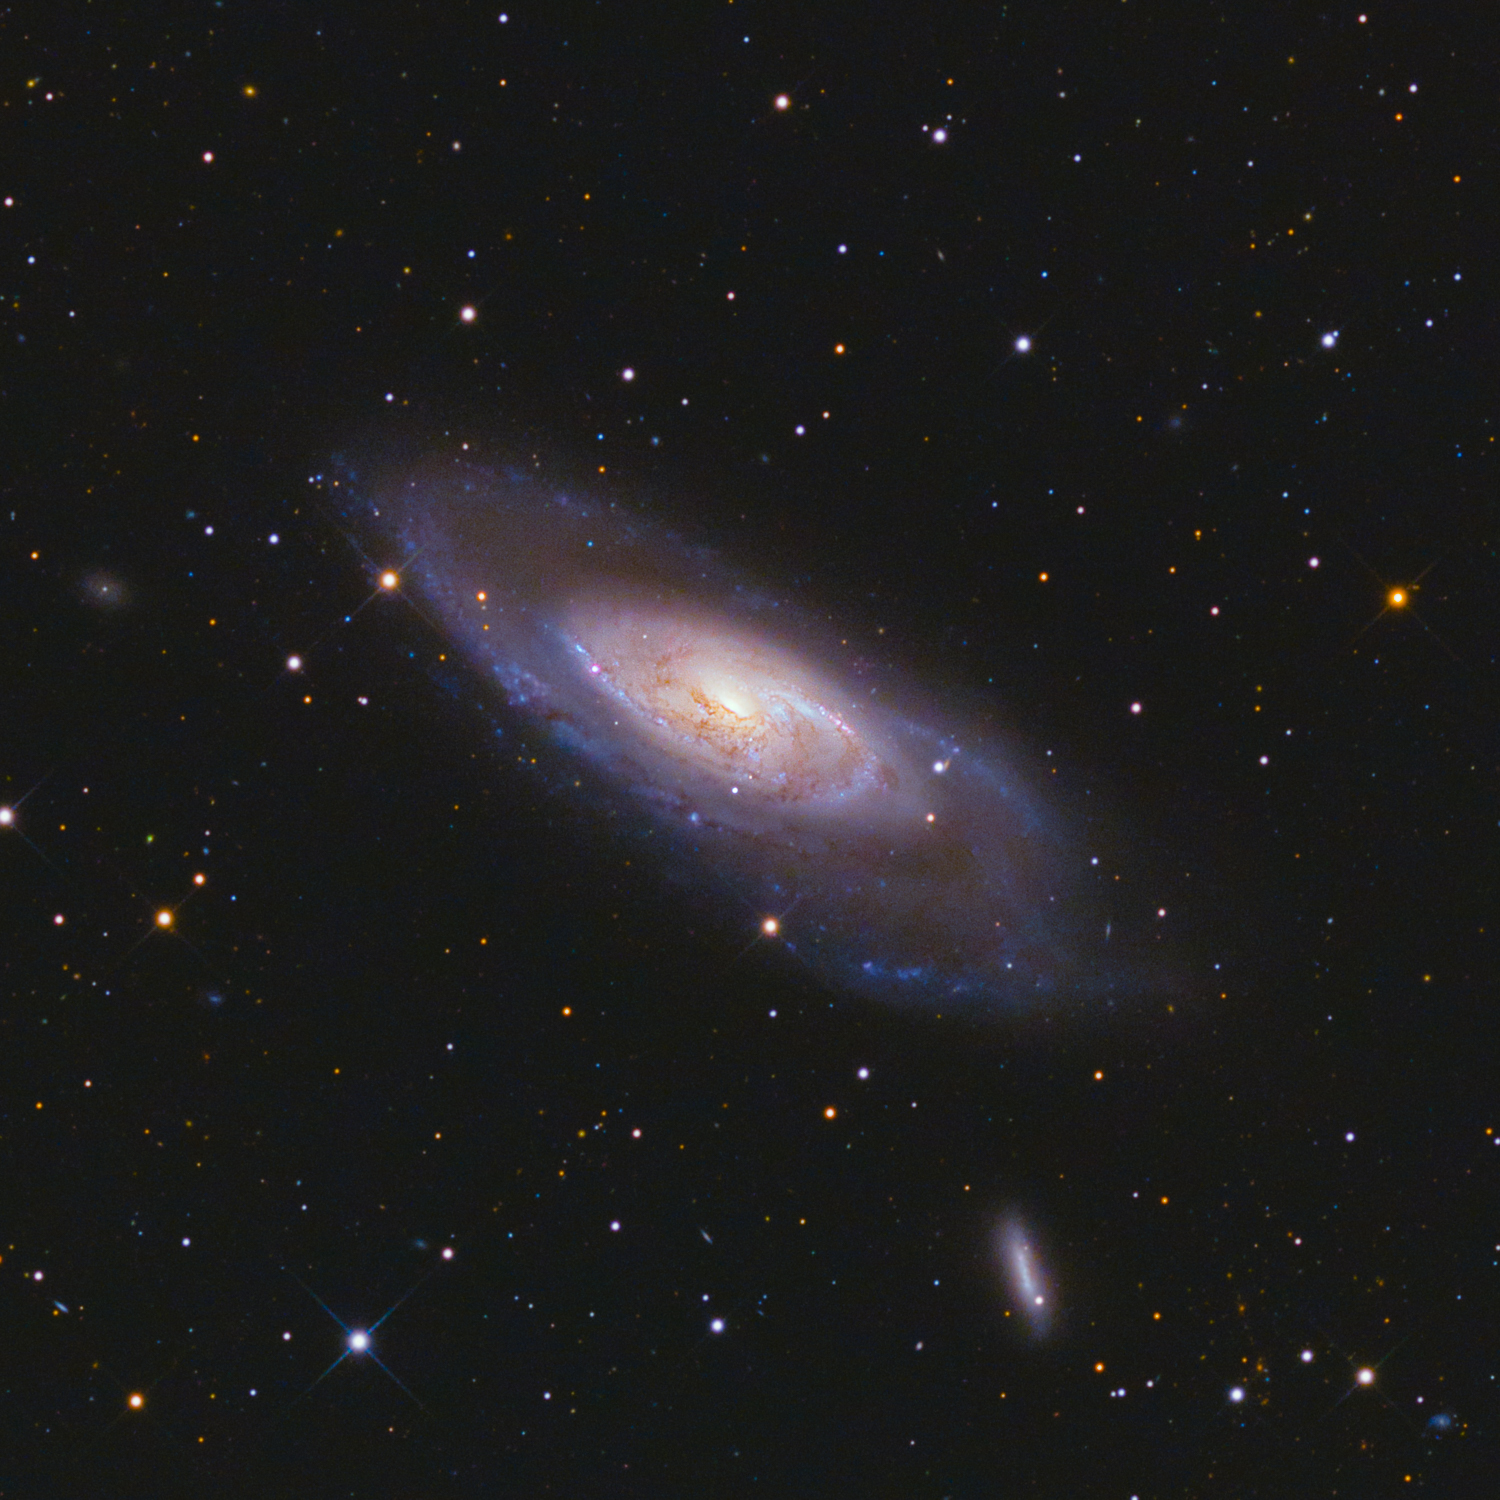 M106_ORG_4and5_Mix23-2.jpg